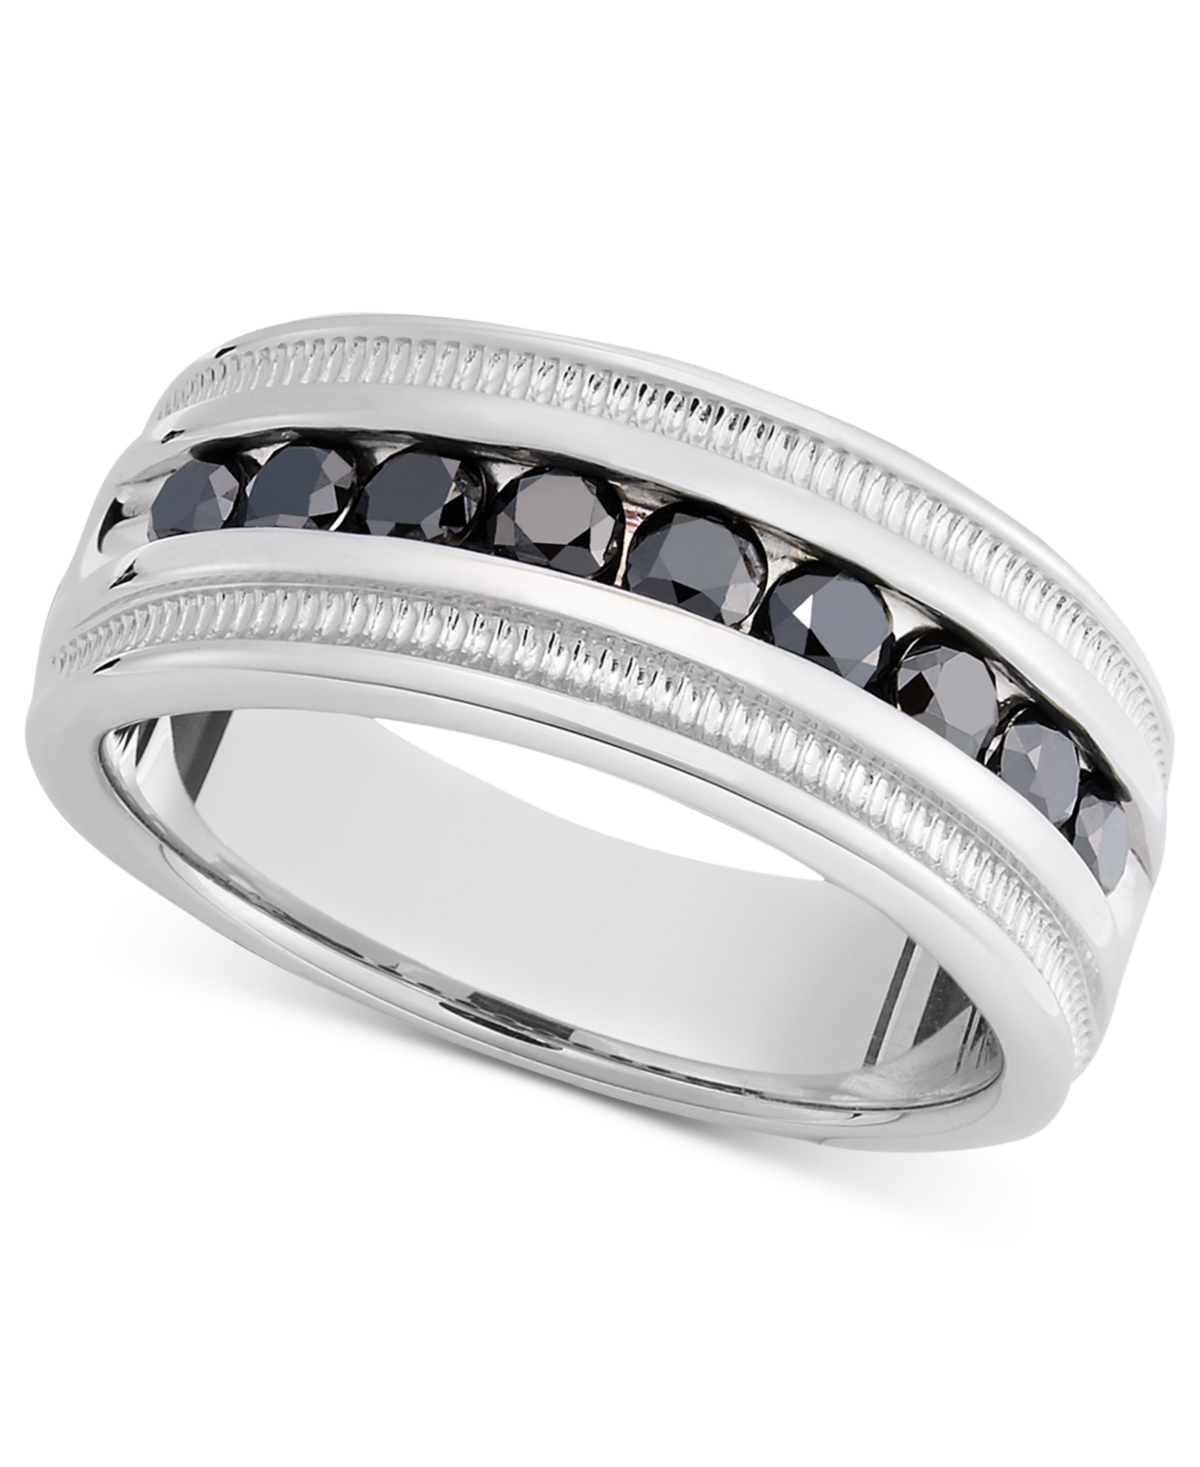 Geheim congestie Nauwgezet Macy's Men's Sterling Silver Ring, Black Diamond Band (1 ct. t.w.) &  Reviews - Rings - Jewelry & Watches - Macy's